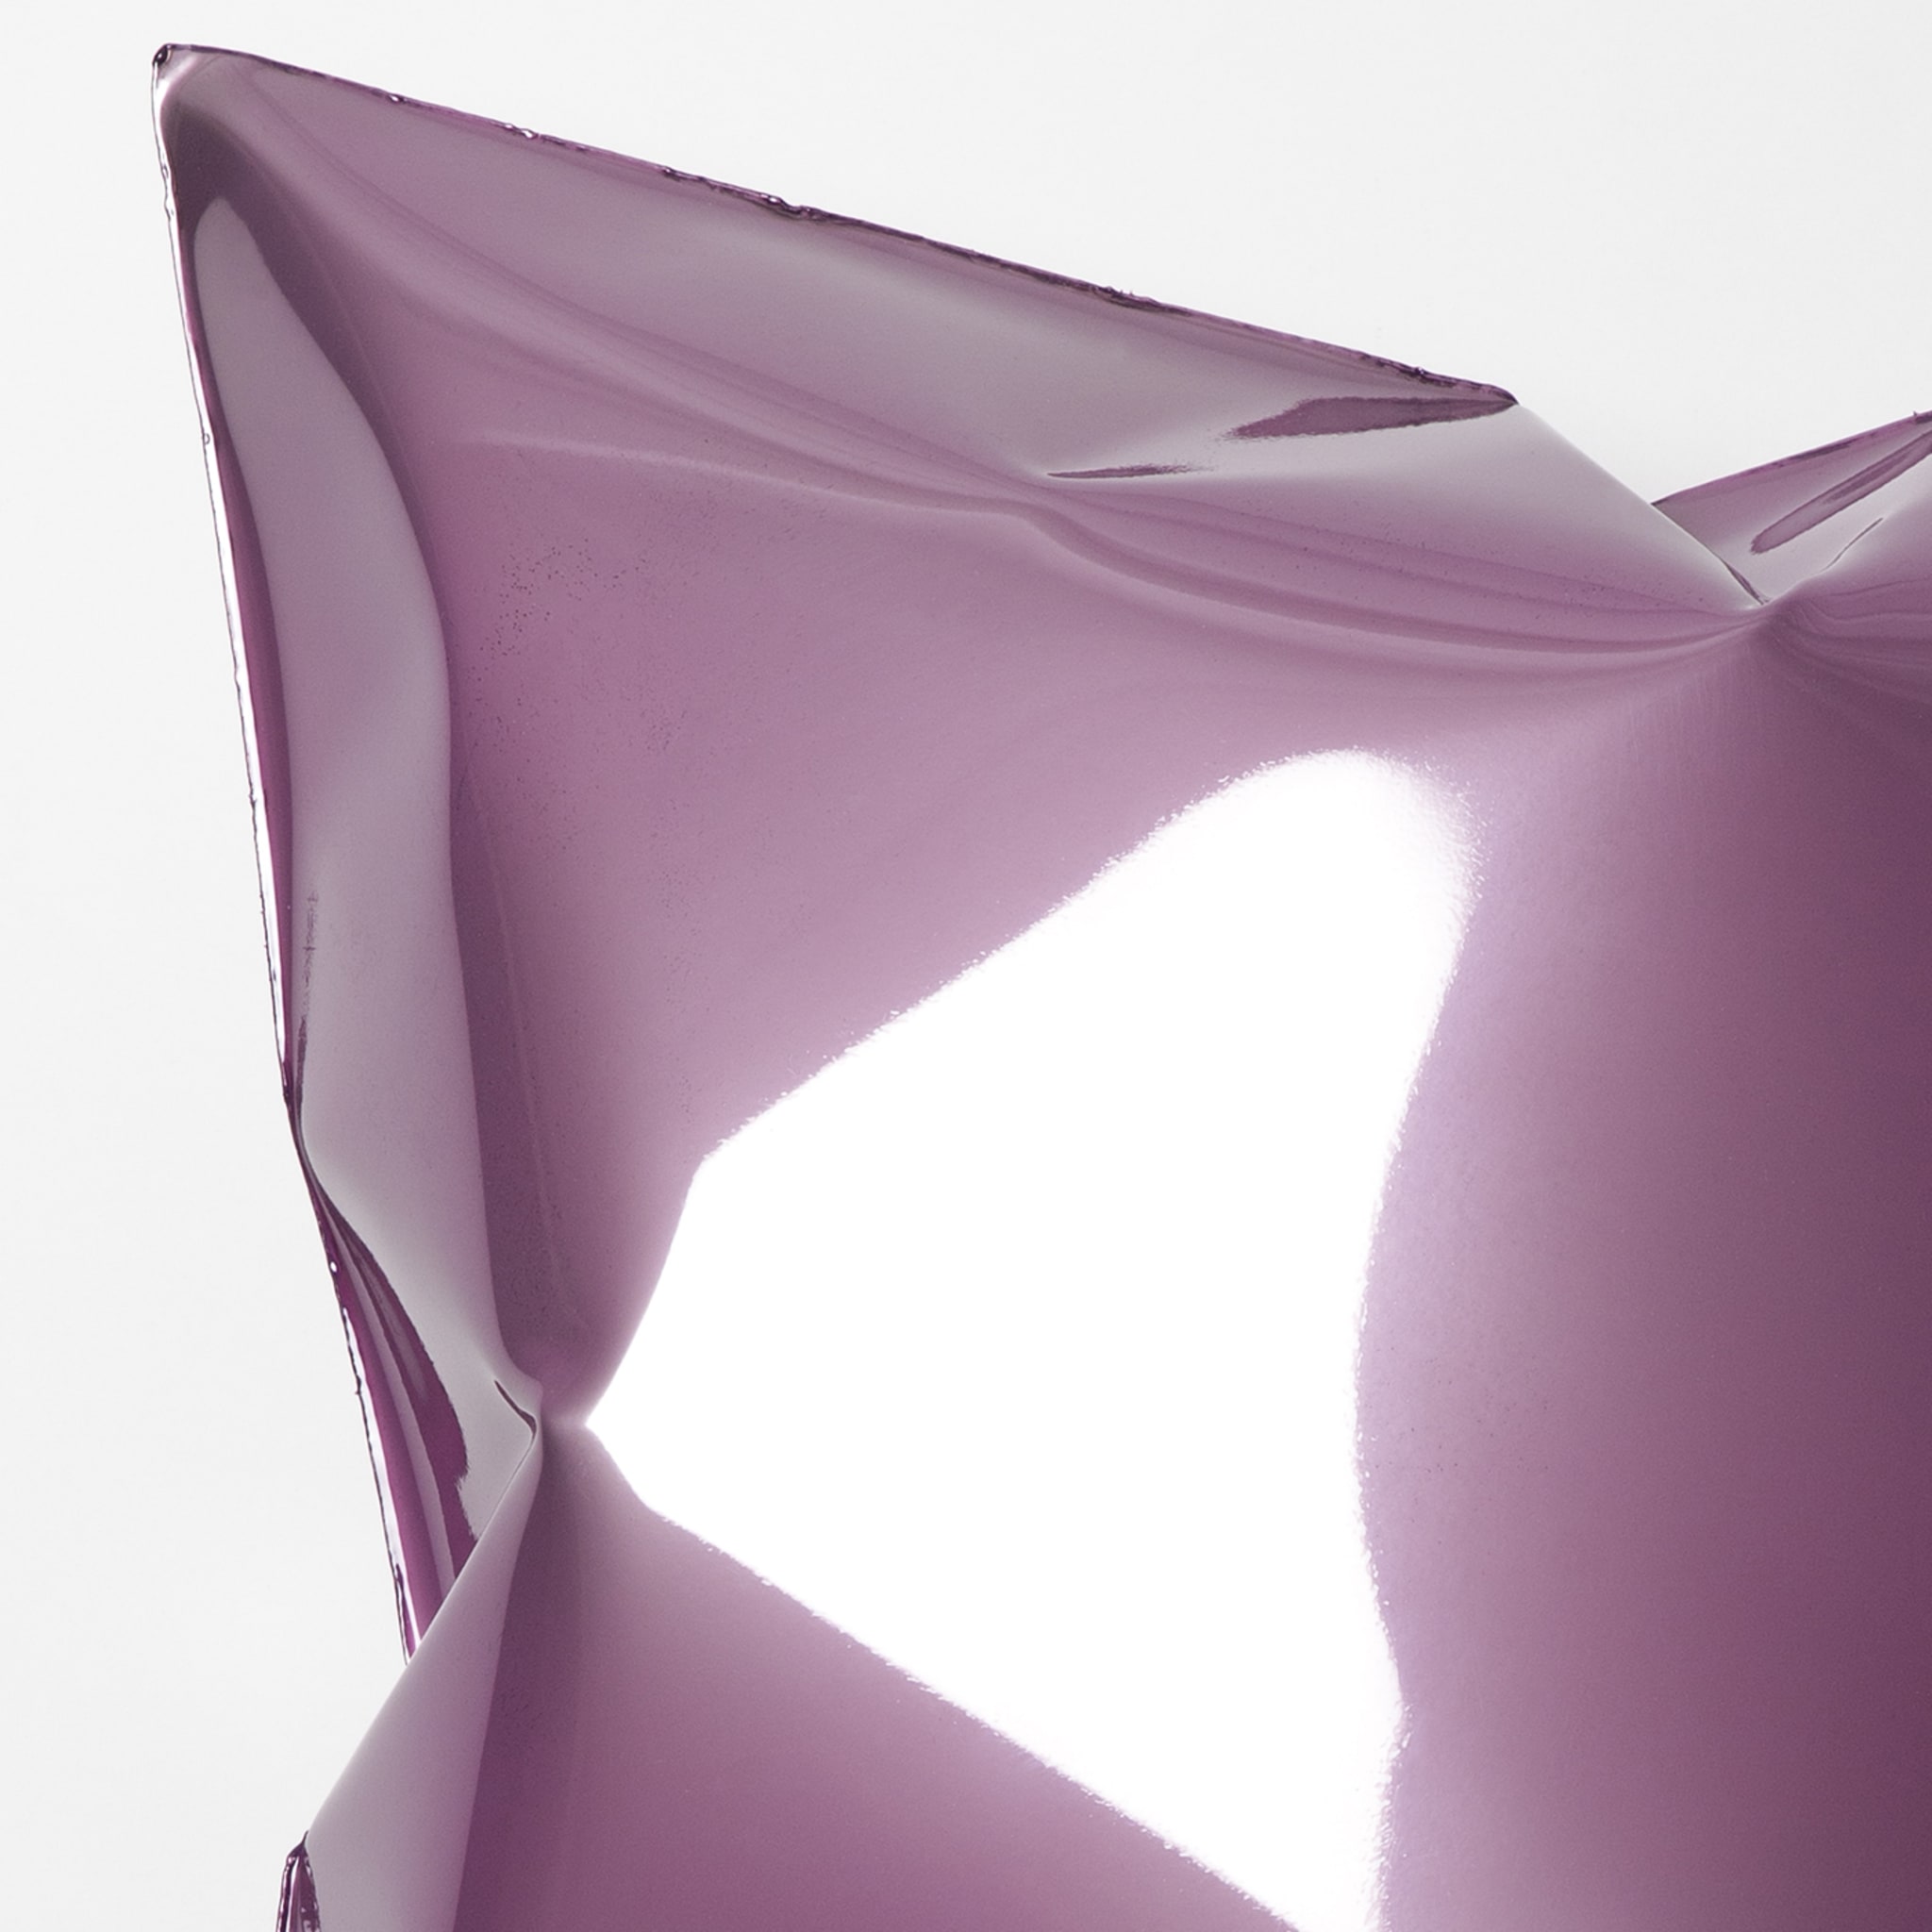 Square Purple Pillow-Shaped Wall Sculpture - Alternative view 1